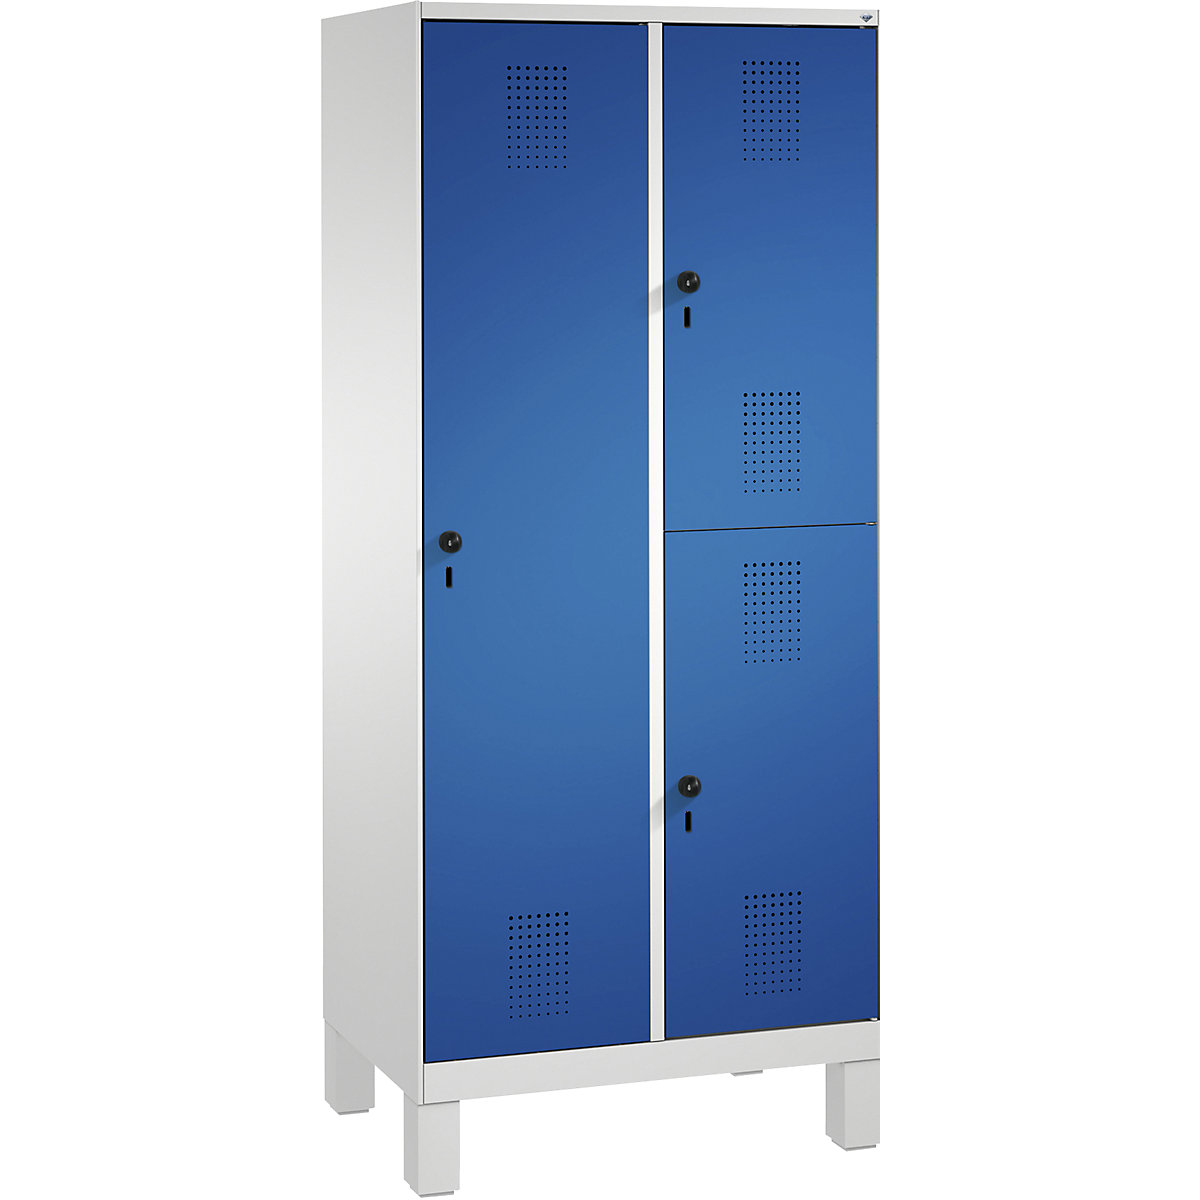 EVOLO combination cupboard, single and double tier – C+P, 2 compartments, 3 doors, compartment width 400 mm, with feet, light grey / gentian blue